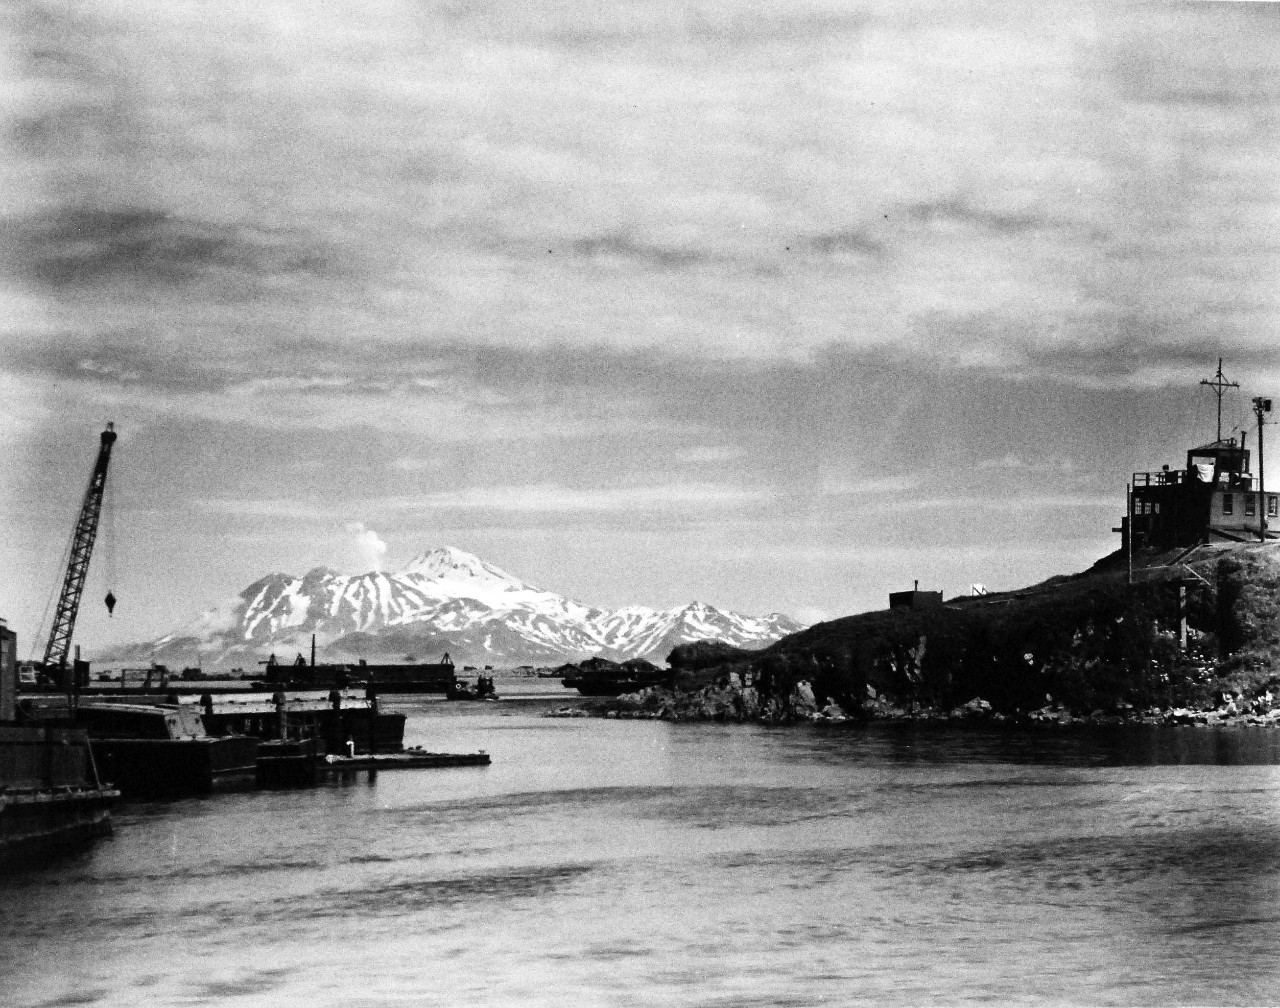 80-G-242070:      Adak, Alaska, July 1944.   Small boat basin at Adak, Alaska.  Great Sitkin Island in background.  Captain of Port Office extreme right.   Photographed on 26 July 1944.   Official U.S. Navy Photograph, now in the collections of the National Archives.  (2014/05/22). 